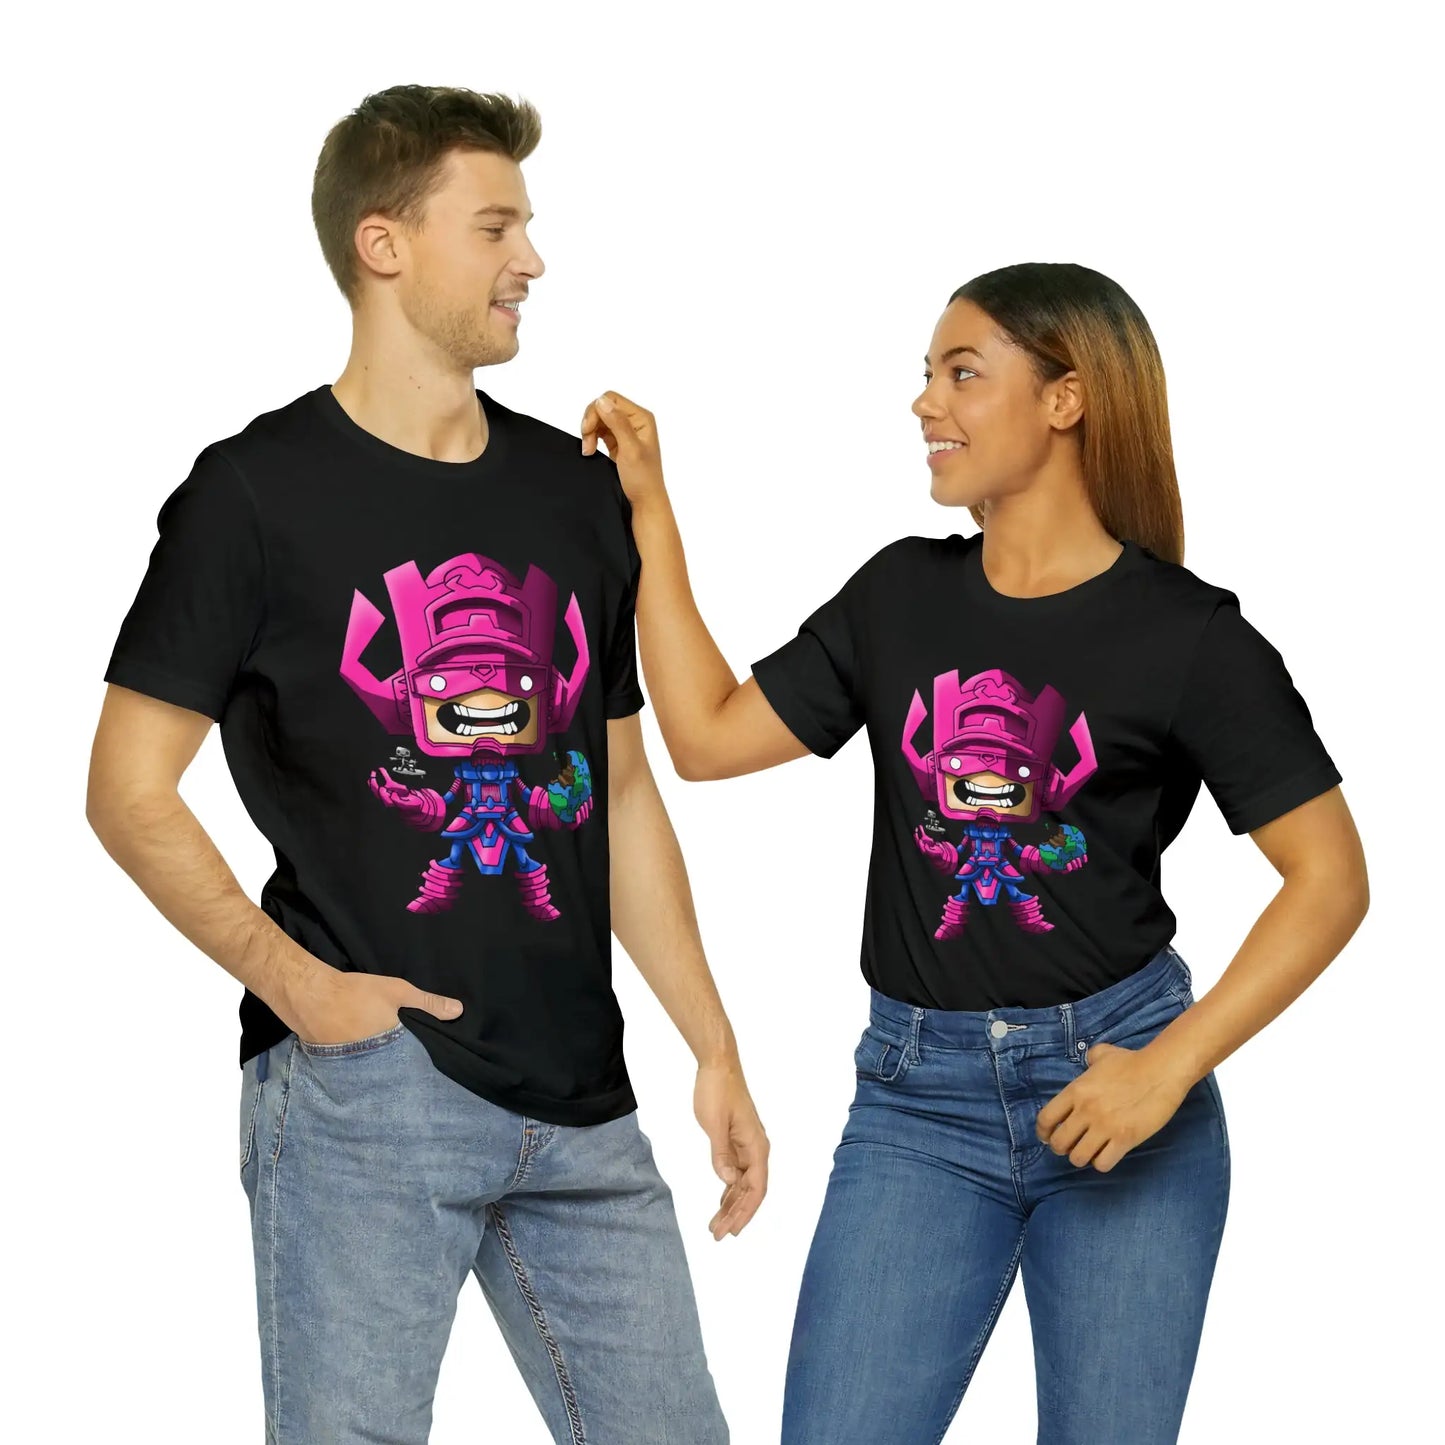 Galactus and Silver Surfer T-Shirt Cartoon Planet Devourer Chibi Style Gift Tee Unisex For Men and Women